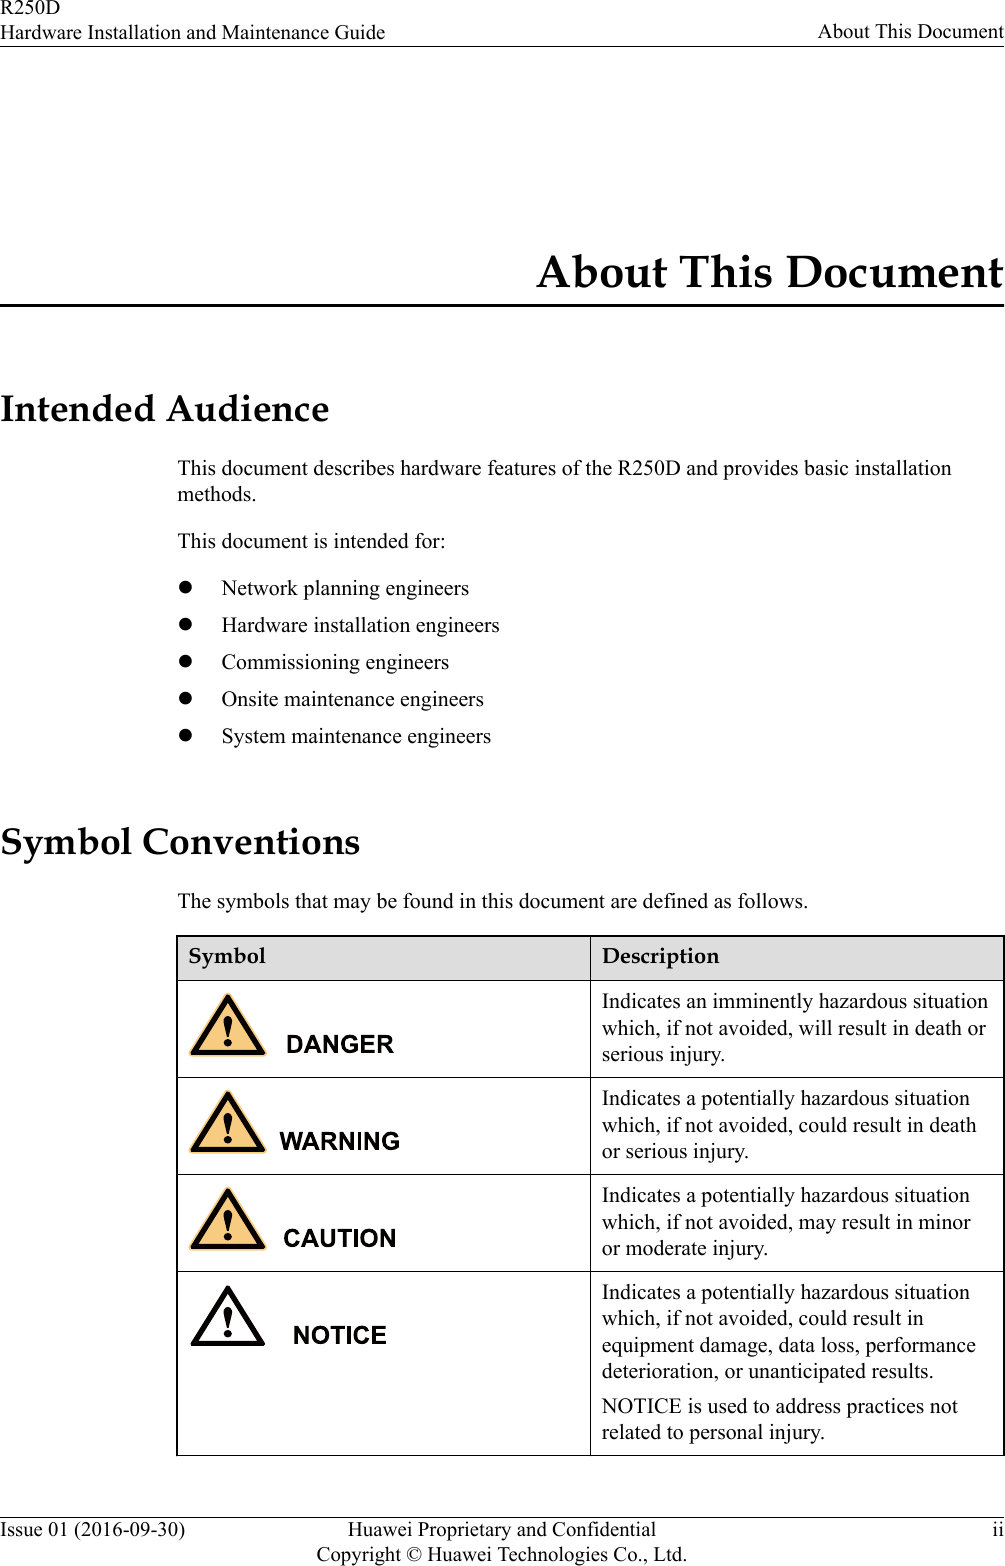 About This DocumentIntended AudienceThis document describes hardware features of the R250D and provides basic installationmethods.This document is intended for:lNetwork planning engineerslHardware installation engineerslCommissioning engineerslOnsite maintenance engineerslSystem maintenance engineersSymbol ConventionsThe symbols that may be found in this document are defined as follows.Symbol DescriptionIndicates an imminently hazardous situationwhich, if not avoided, will result in death orserious injury.Indicates a potentially hazardous situationwhich, if not avoided, could result in deathor serious injury.Indicates a potentially hazardous situationwhich, if not avoided, may result in minoror moderate injury.Indicates a potentially hazardous situationwhich, if not avoided, could result inequipment damage, data loss, performancedeterioration, or unanticipated results.NOTICE is used to address practices notrelated to personal injury.R250DHardware Installation and Maintenance Guide About This DocumentIssue 01 (2016-09-30) Huawei Proprietary and ConfidentialCopyright © Huawei Technologies Co., Ltd.ii